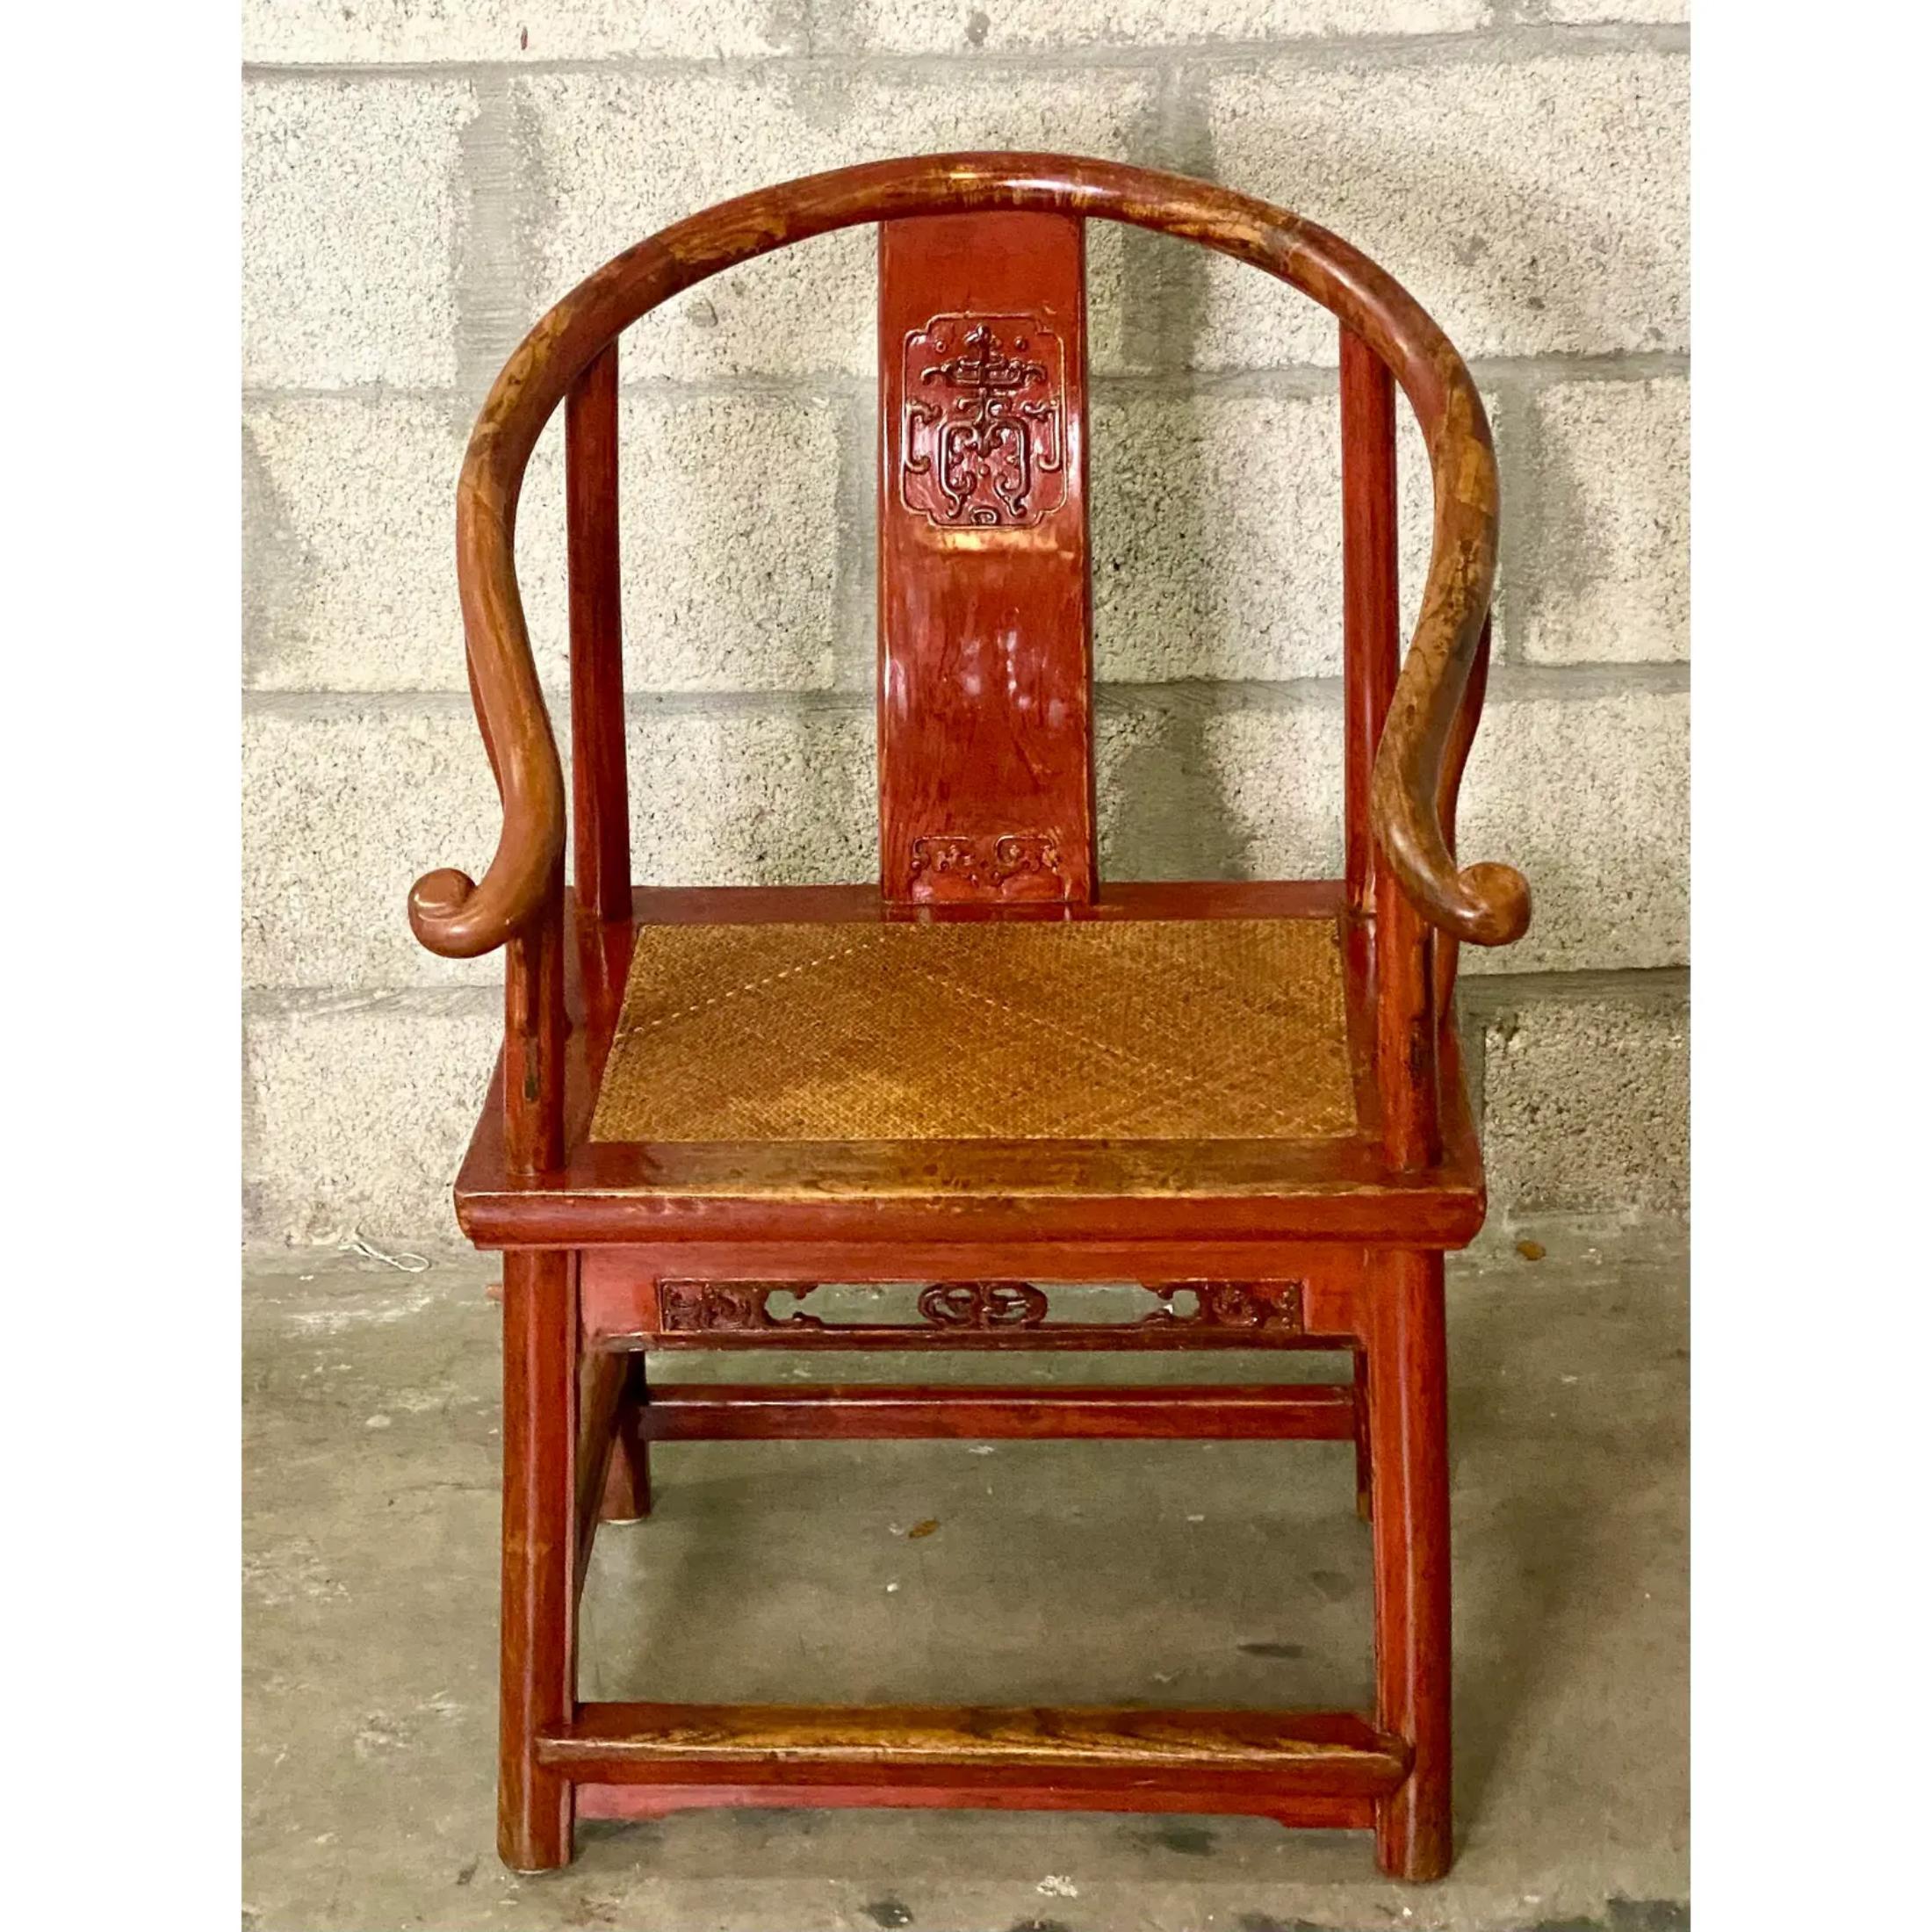 Stunning vintage Asian lacquered chair. A tradition chair reserved for the bride. It’s advanced age has given it a beautiful patina and sheen. Woven rattan seat. Acquired from a Delray estate